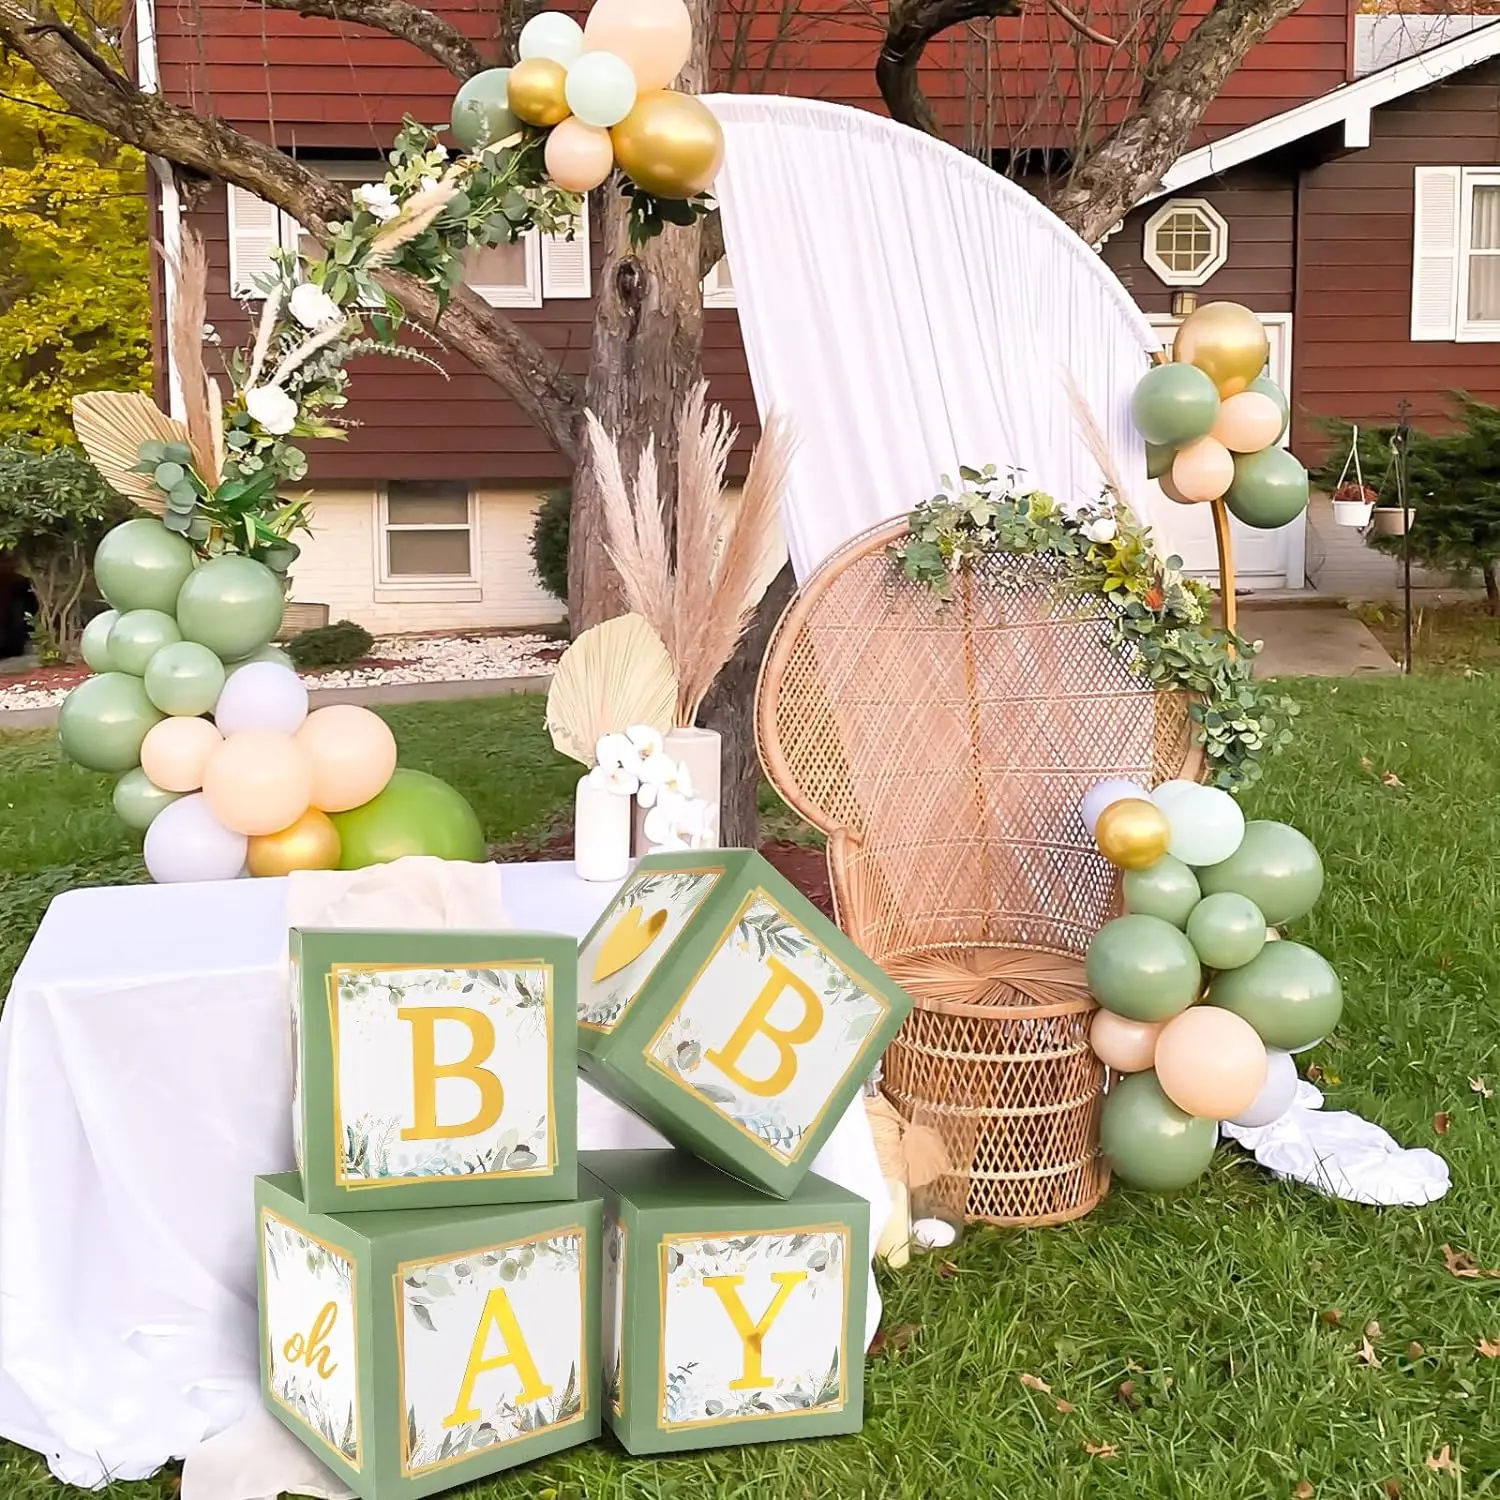 4Pcs Set New Arrivals Factory Green Baby Boxes With Letters Balloons For Birthday Accessories